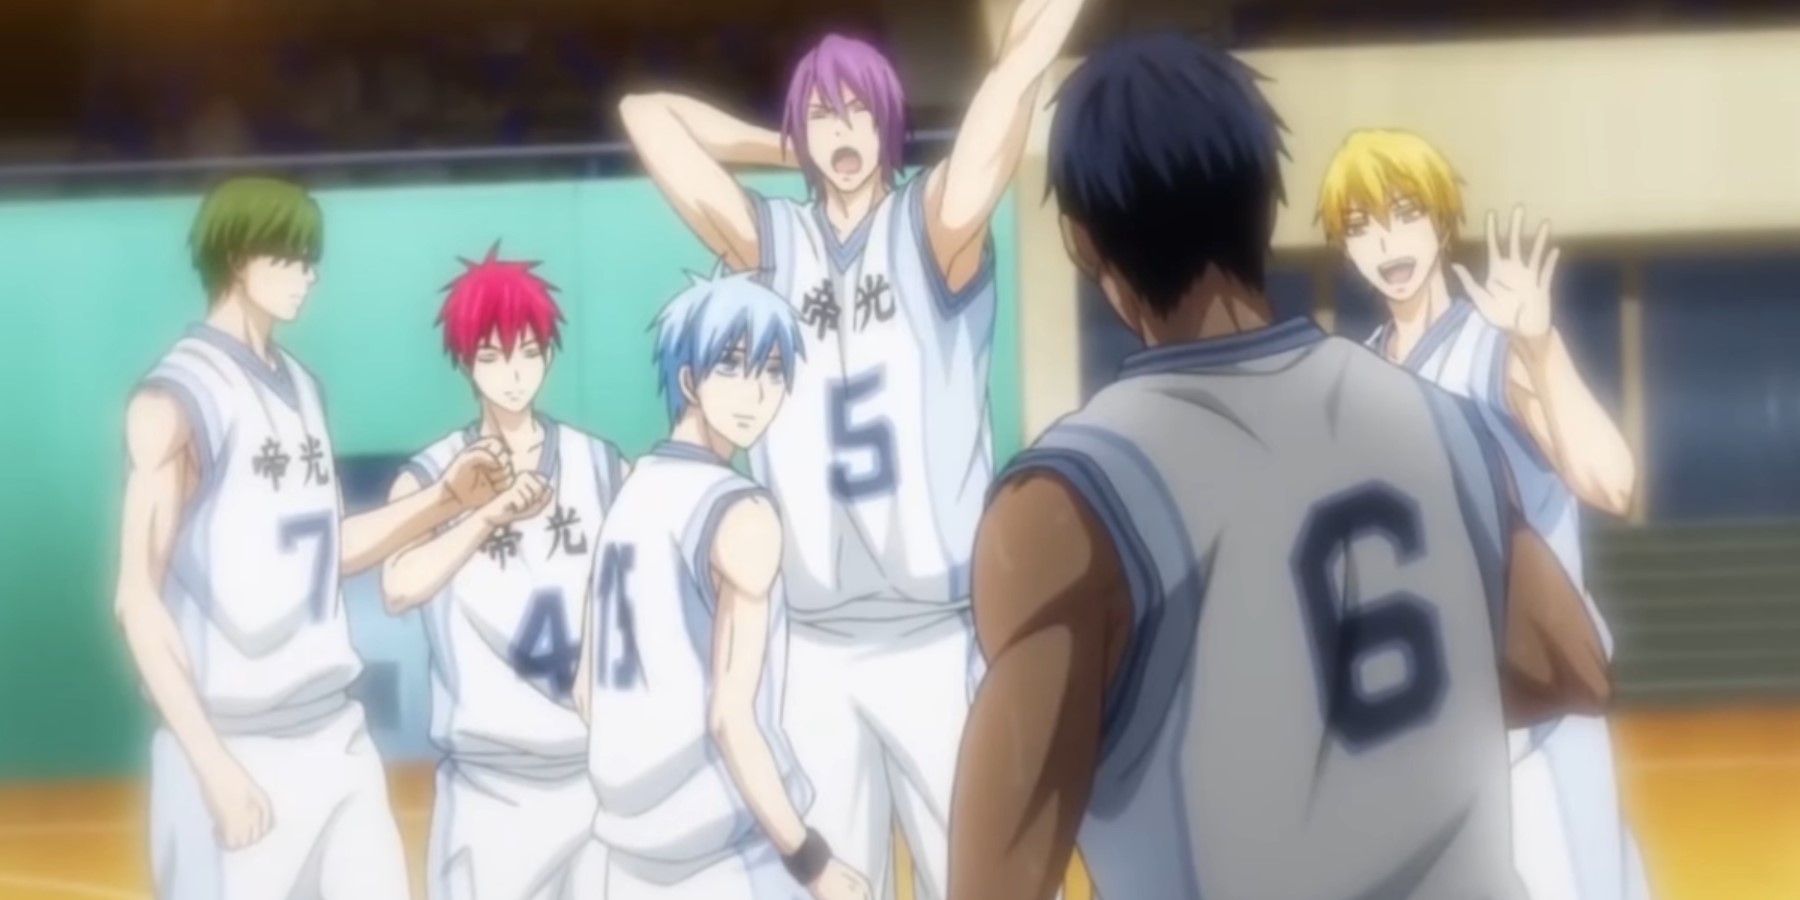 Generation of Miracles KnB